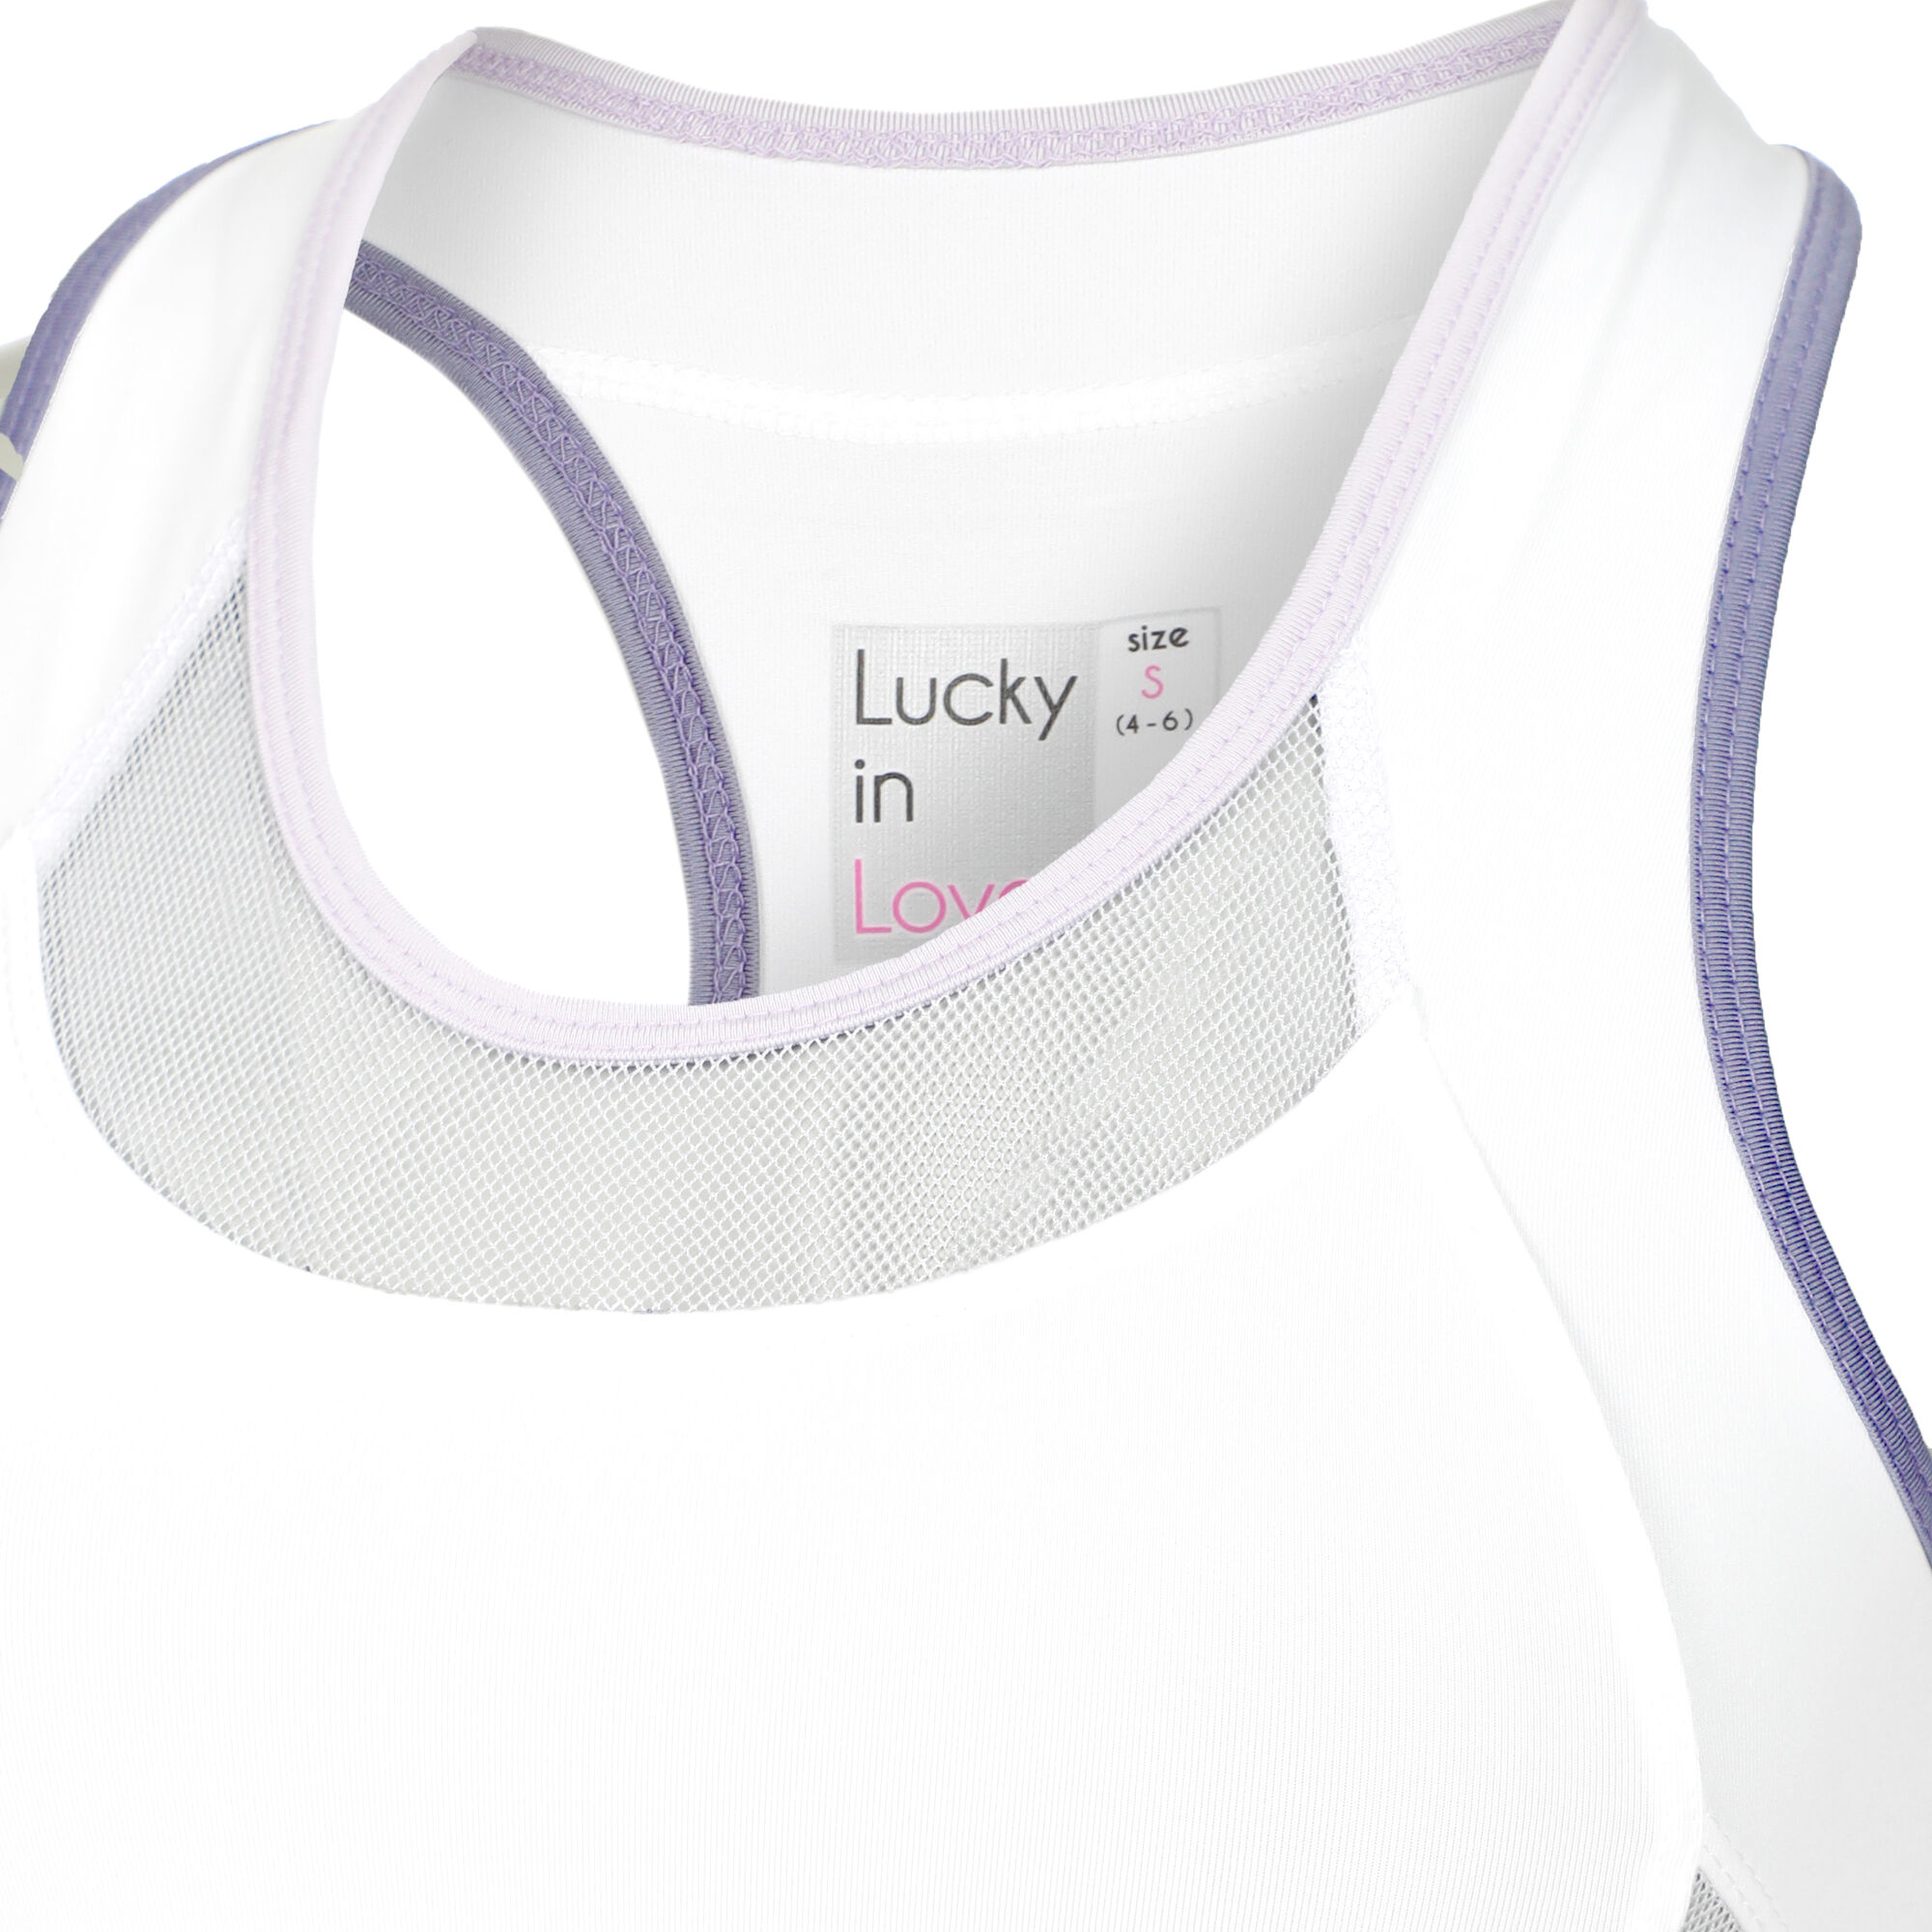 Buy Lucky in Love Shimmer Tank Top Women White, Lilac online